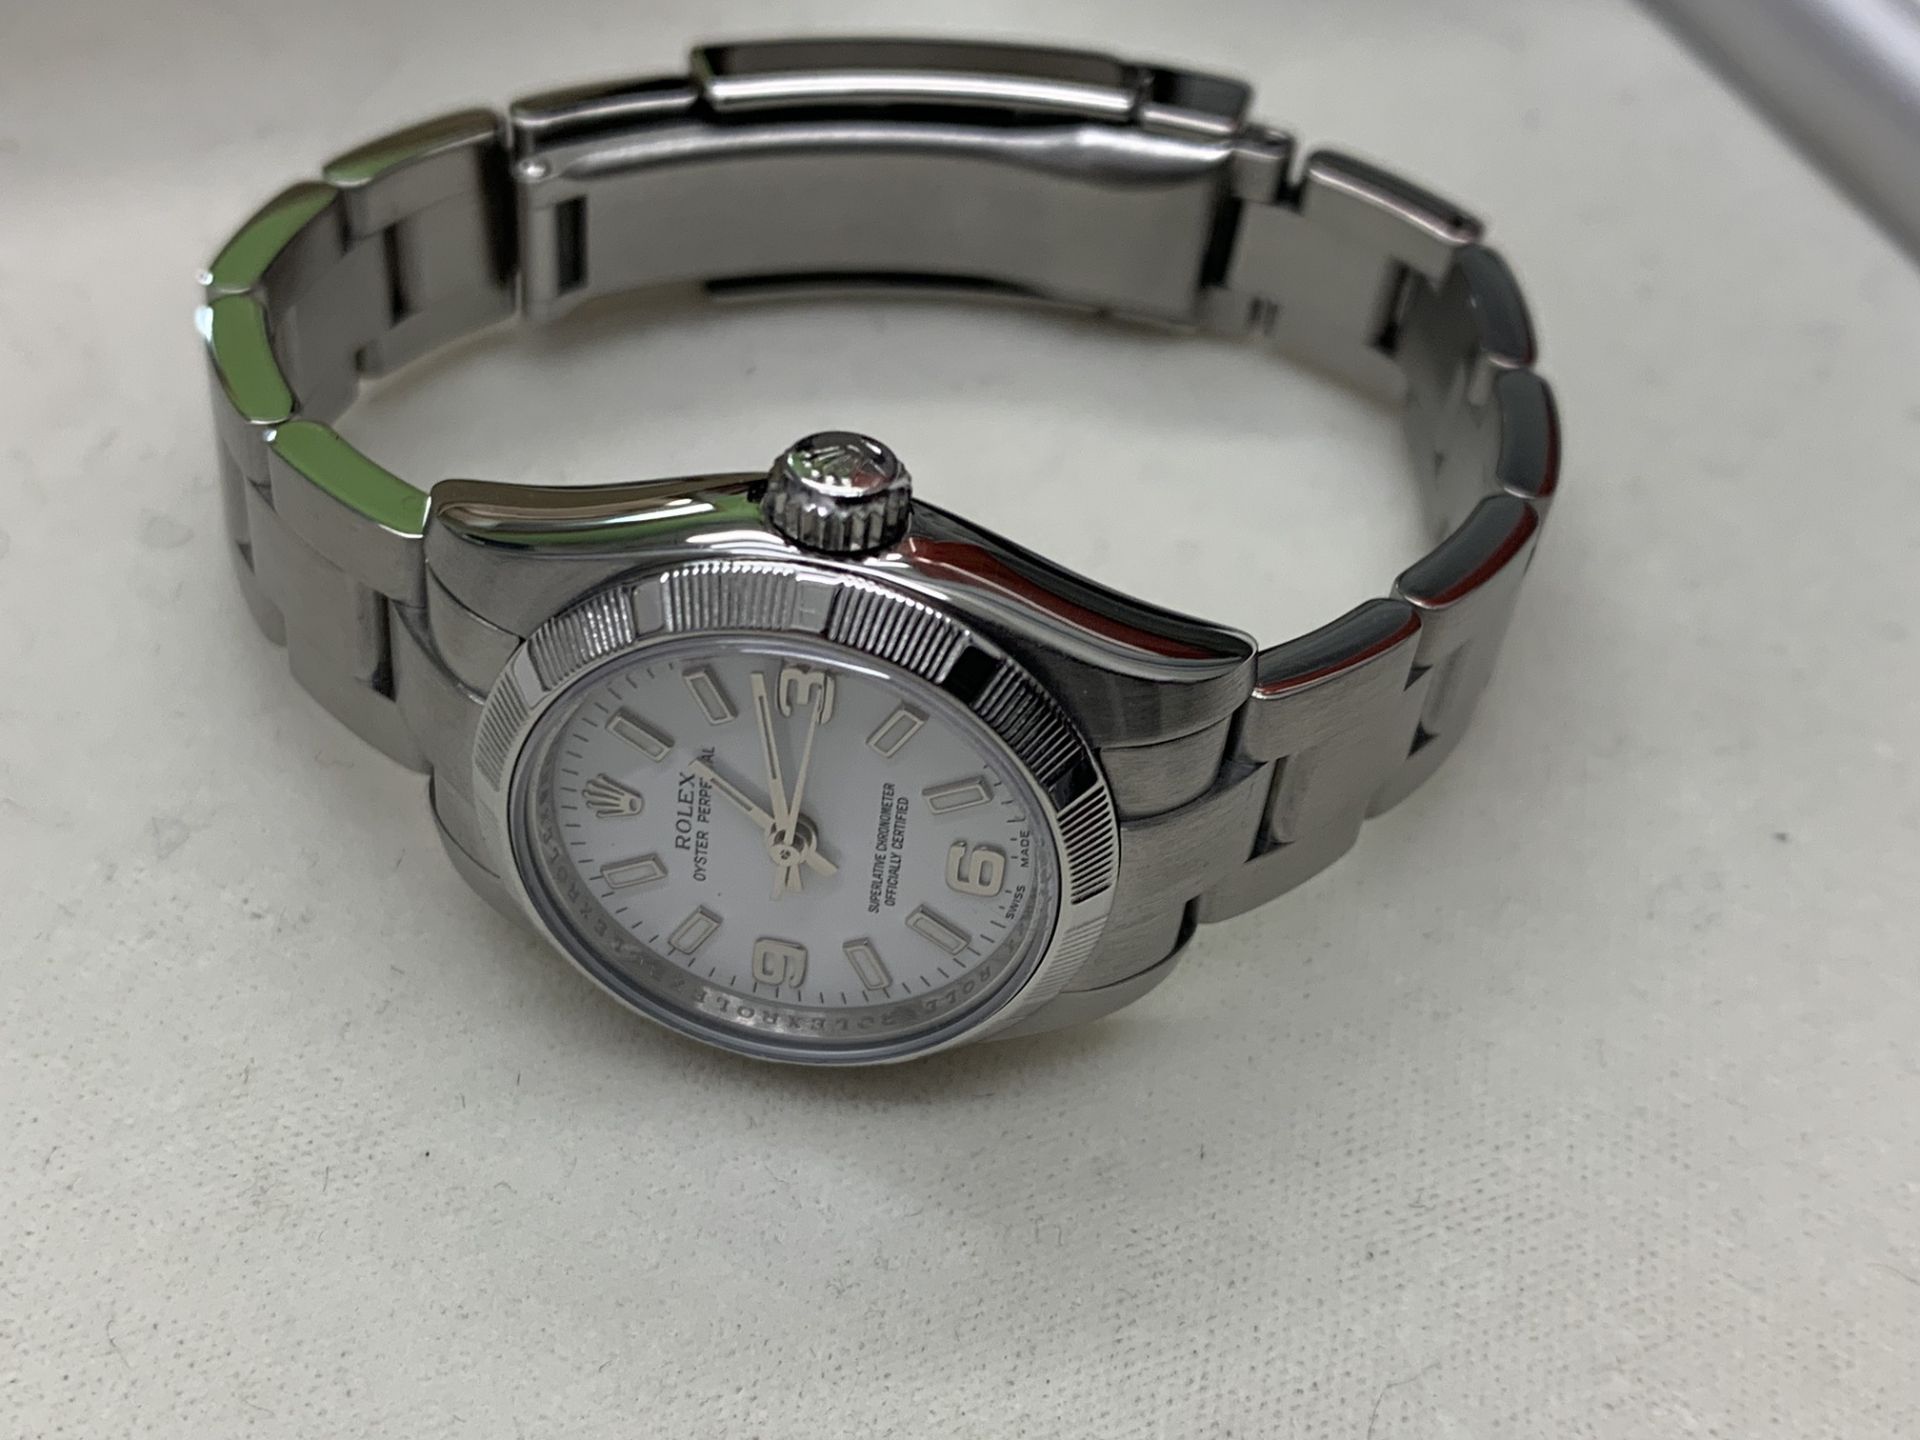 APPROX 2006 ROLEX STAINLESS STEEL WATCH - Image 5 of 6